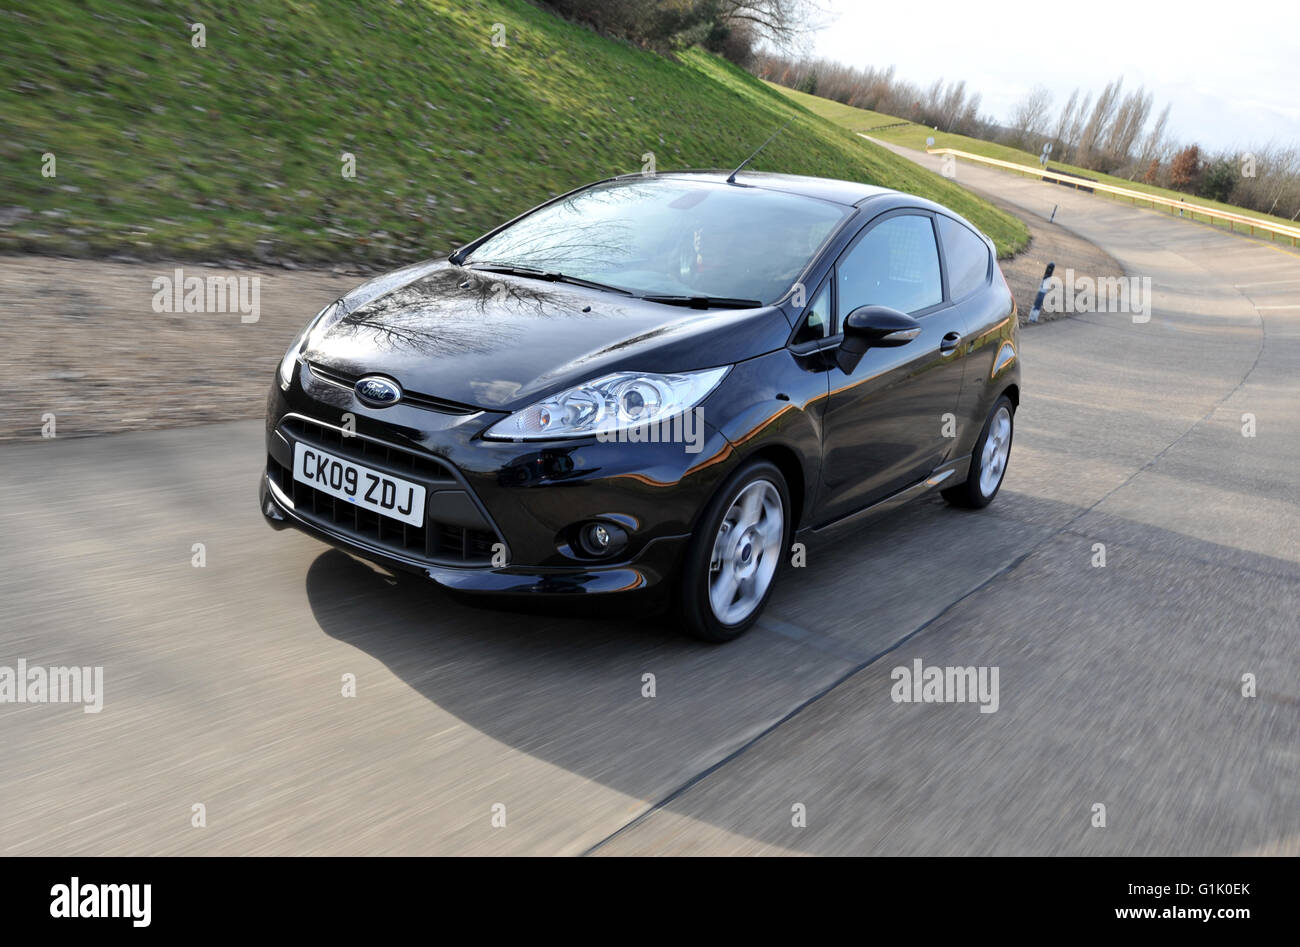 2009 Fiesta van, small car derived commercial vehicle Stock Photo